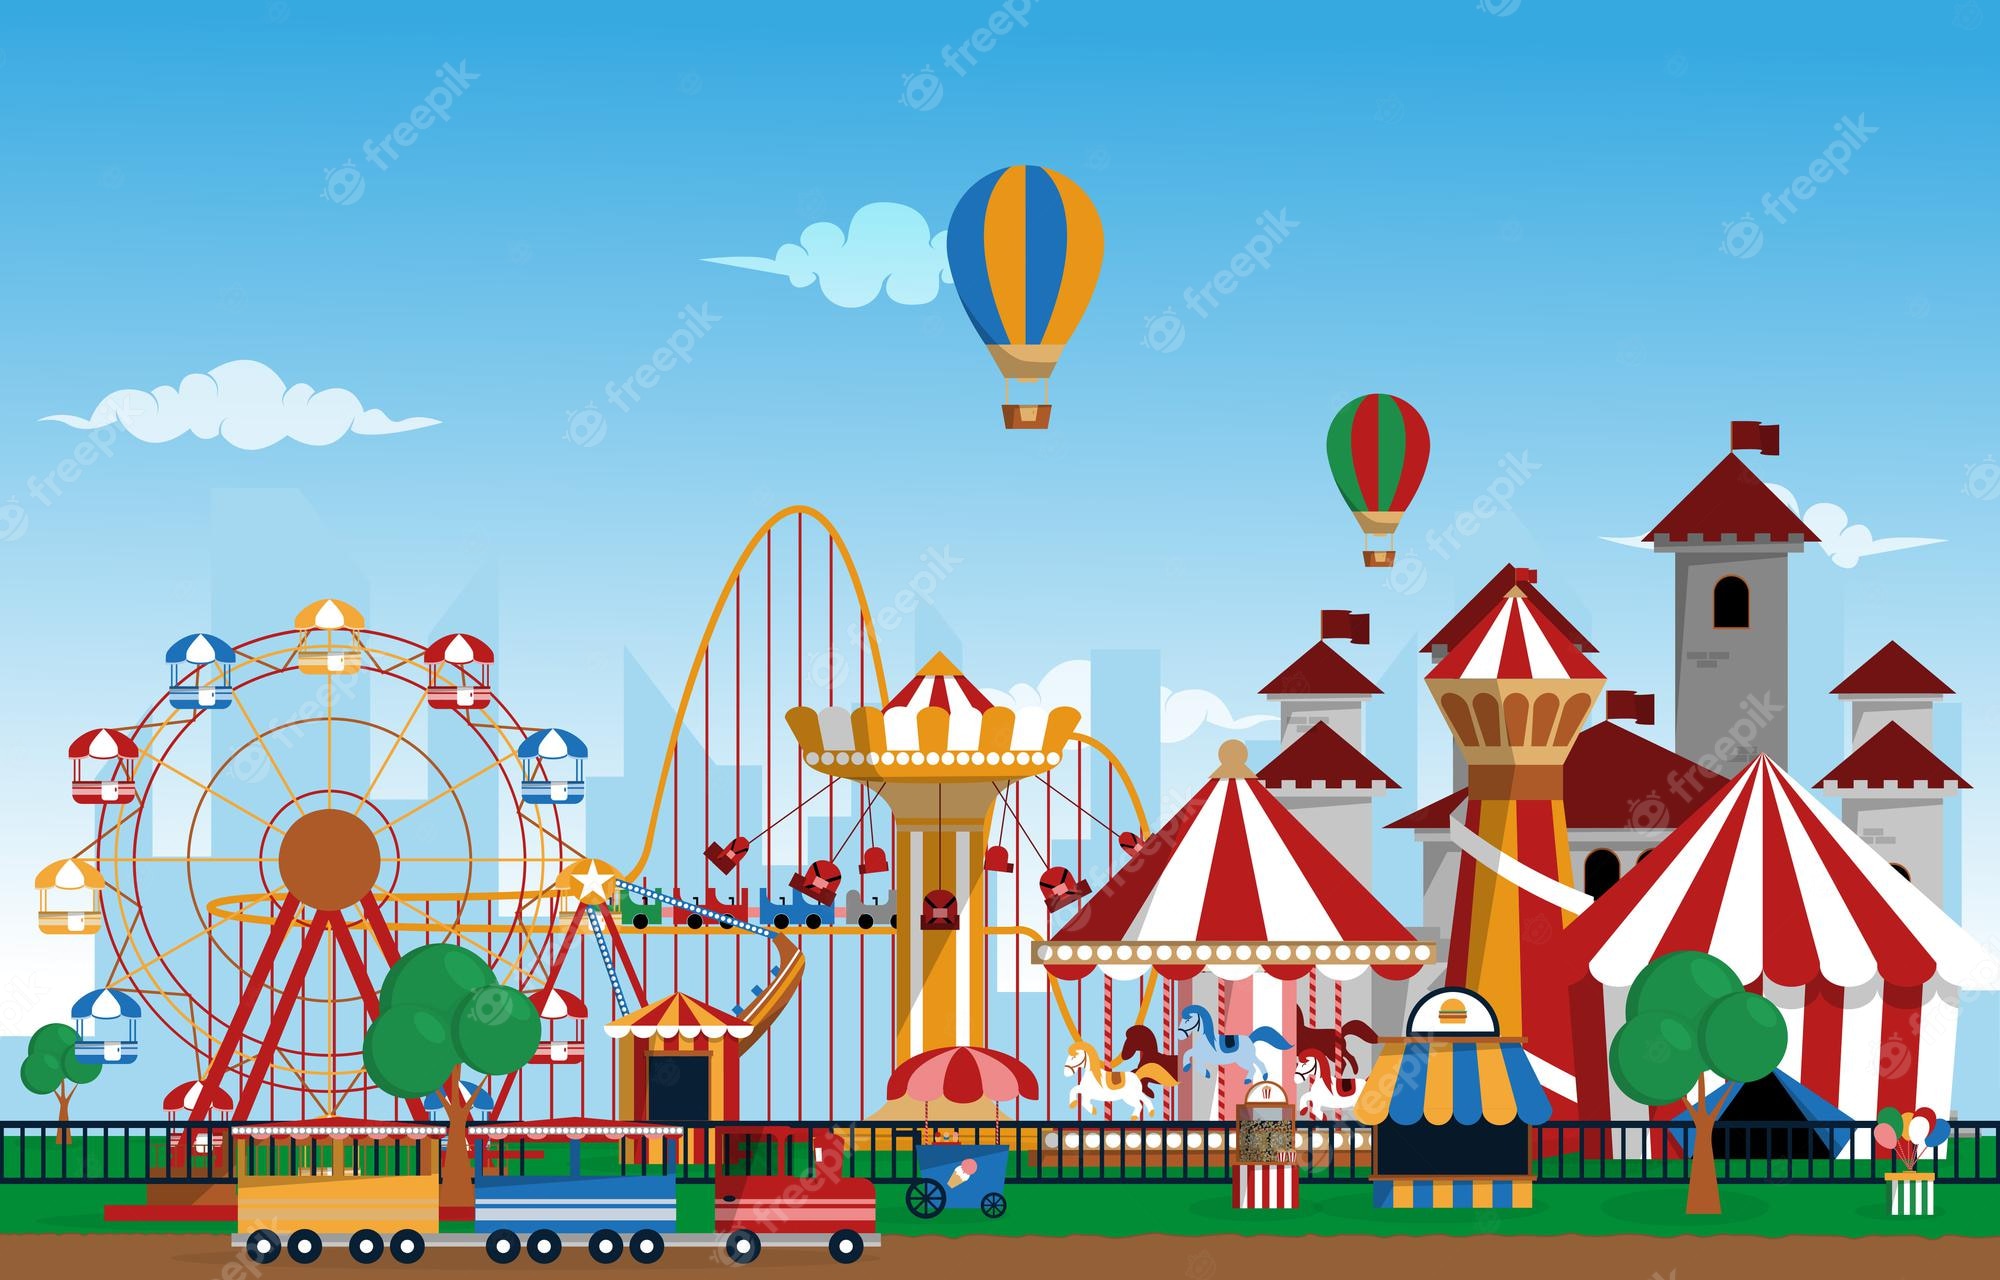 36,000+ Carnival Ride Illustrations, Royalty-Free Vector Graphics